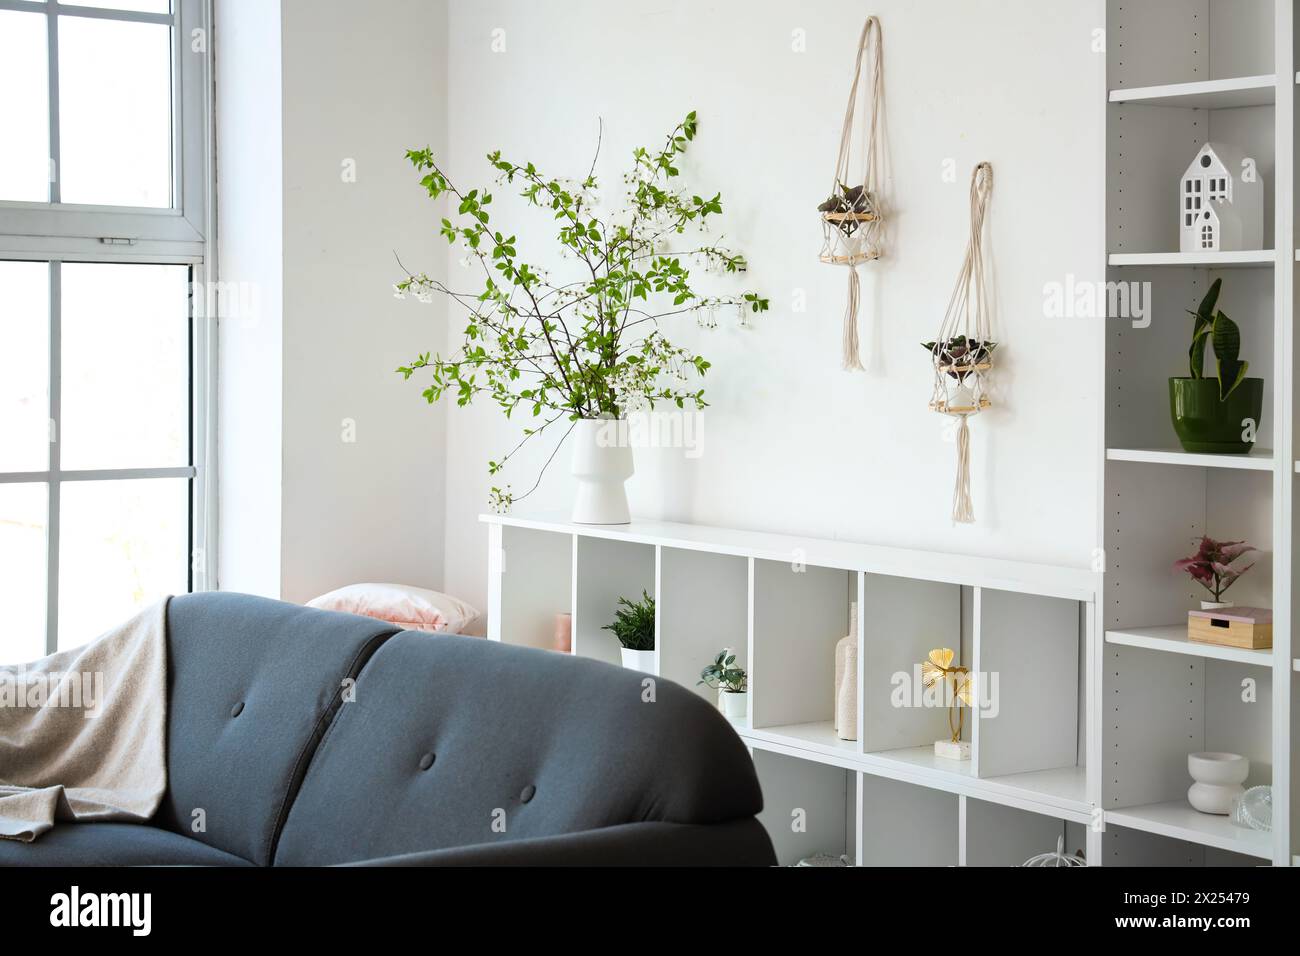 Interior with sofa shelving unit and blooming branches Stock Photo